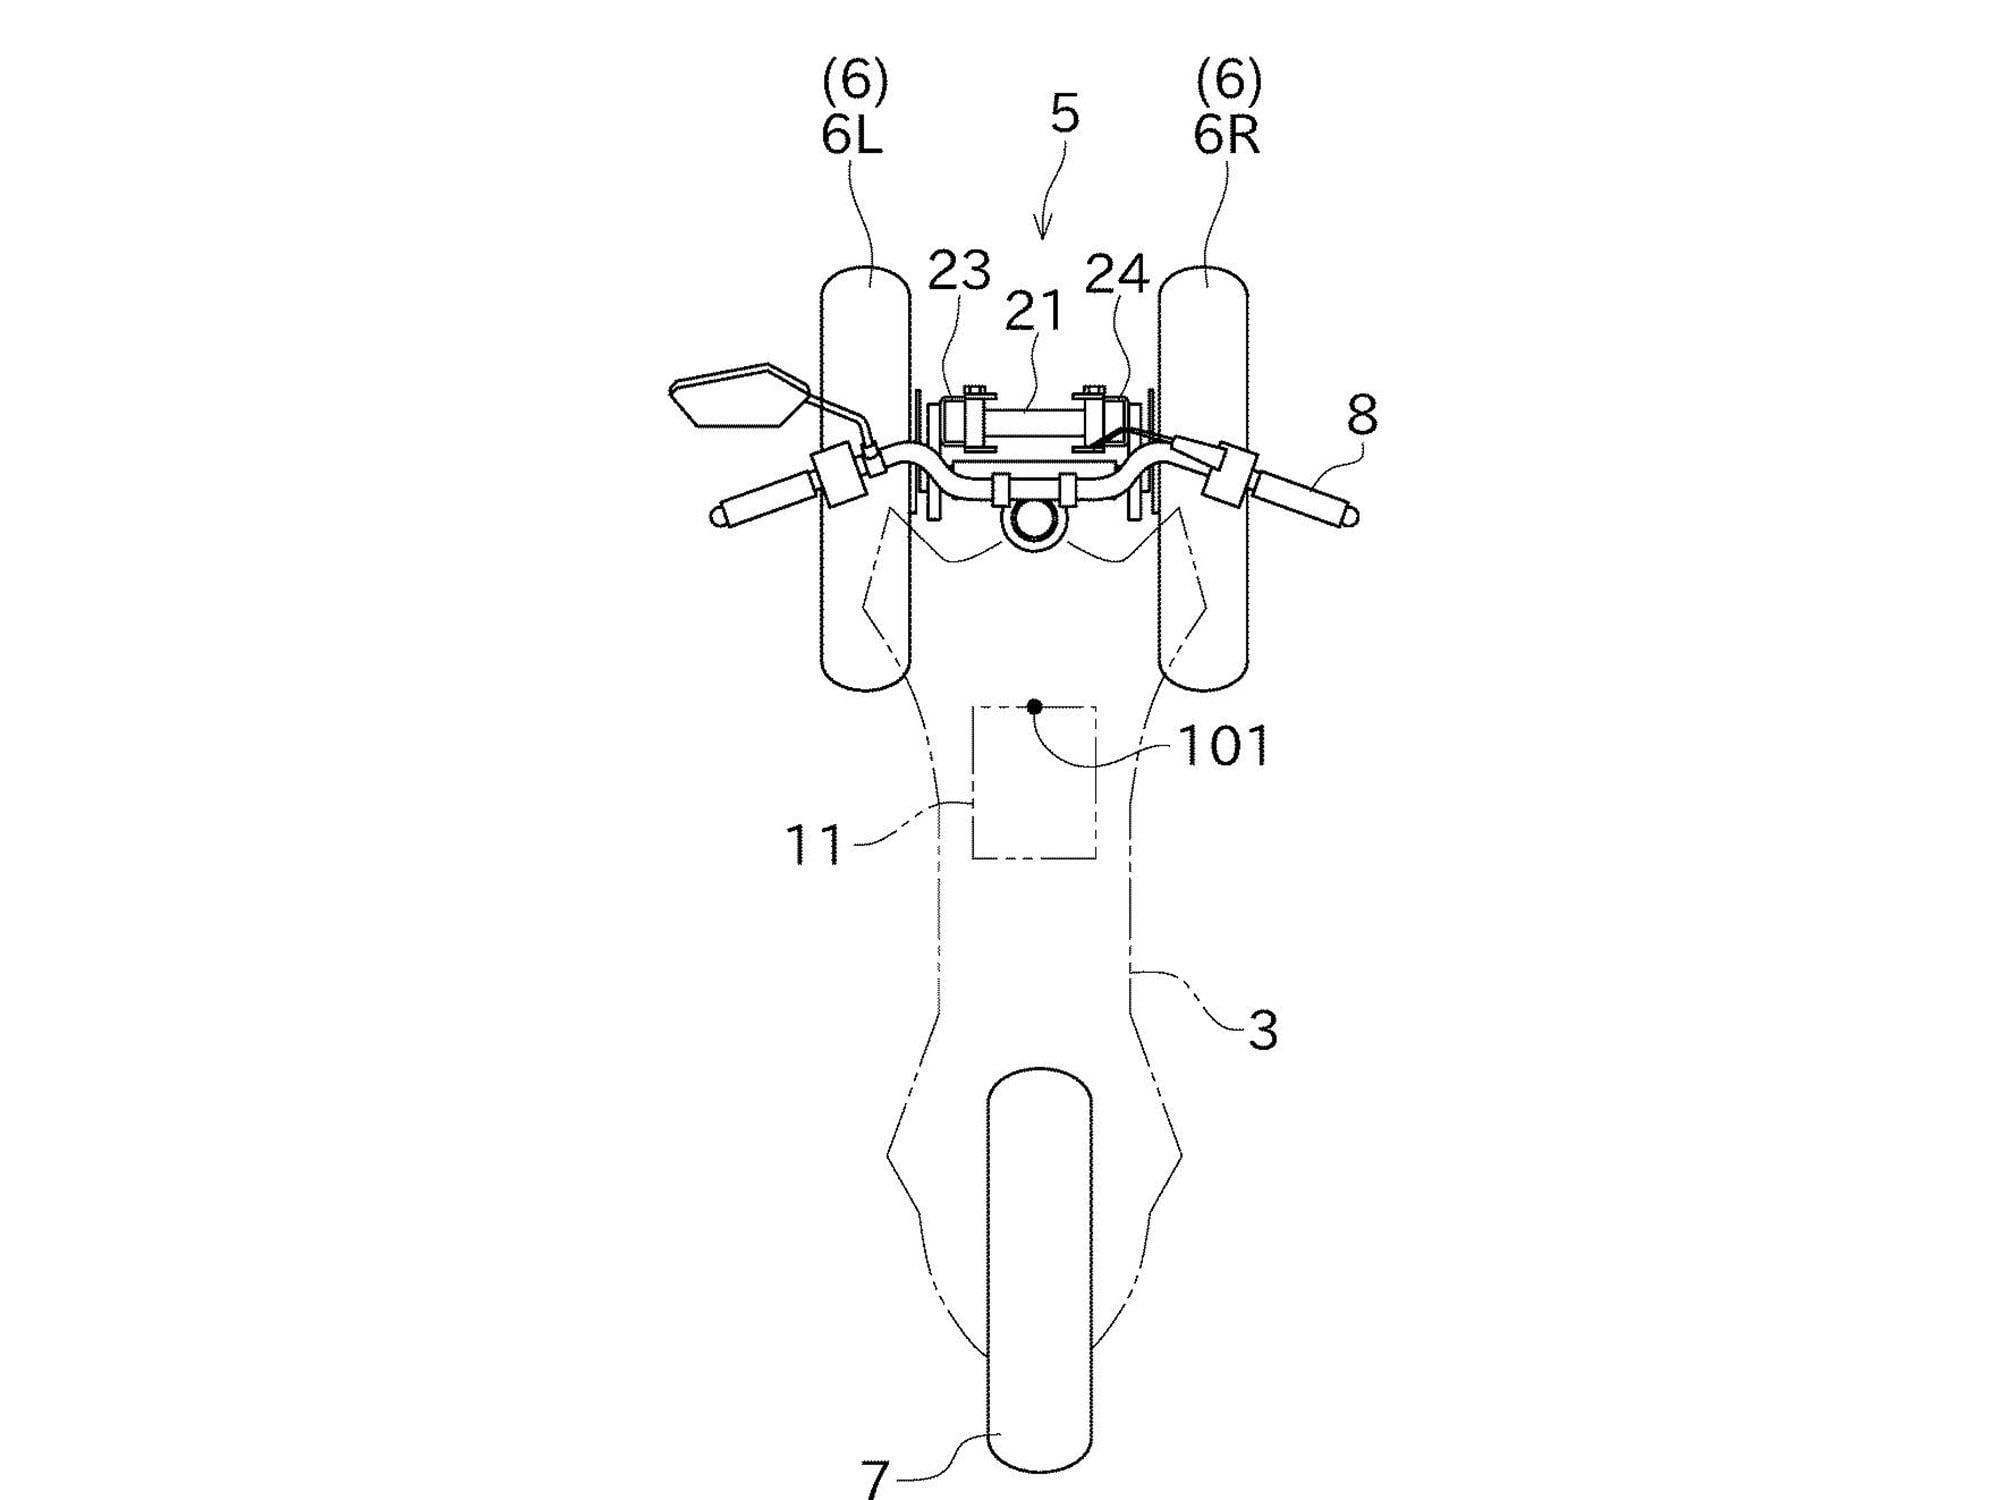 Kawasaki’s patents show two trike versions, one utilizing a vertical plate mounted ahead of the forks for better stability.